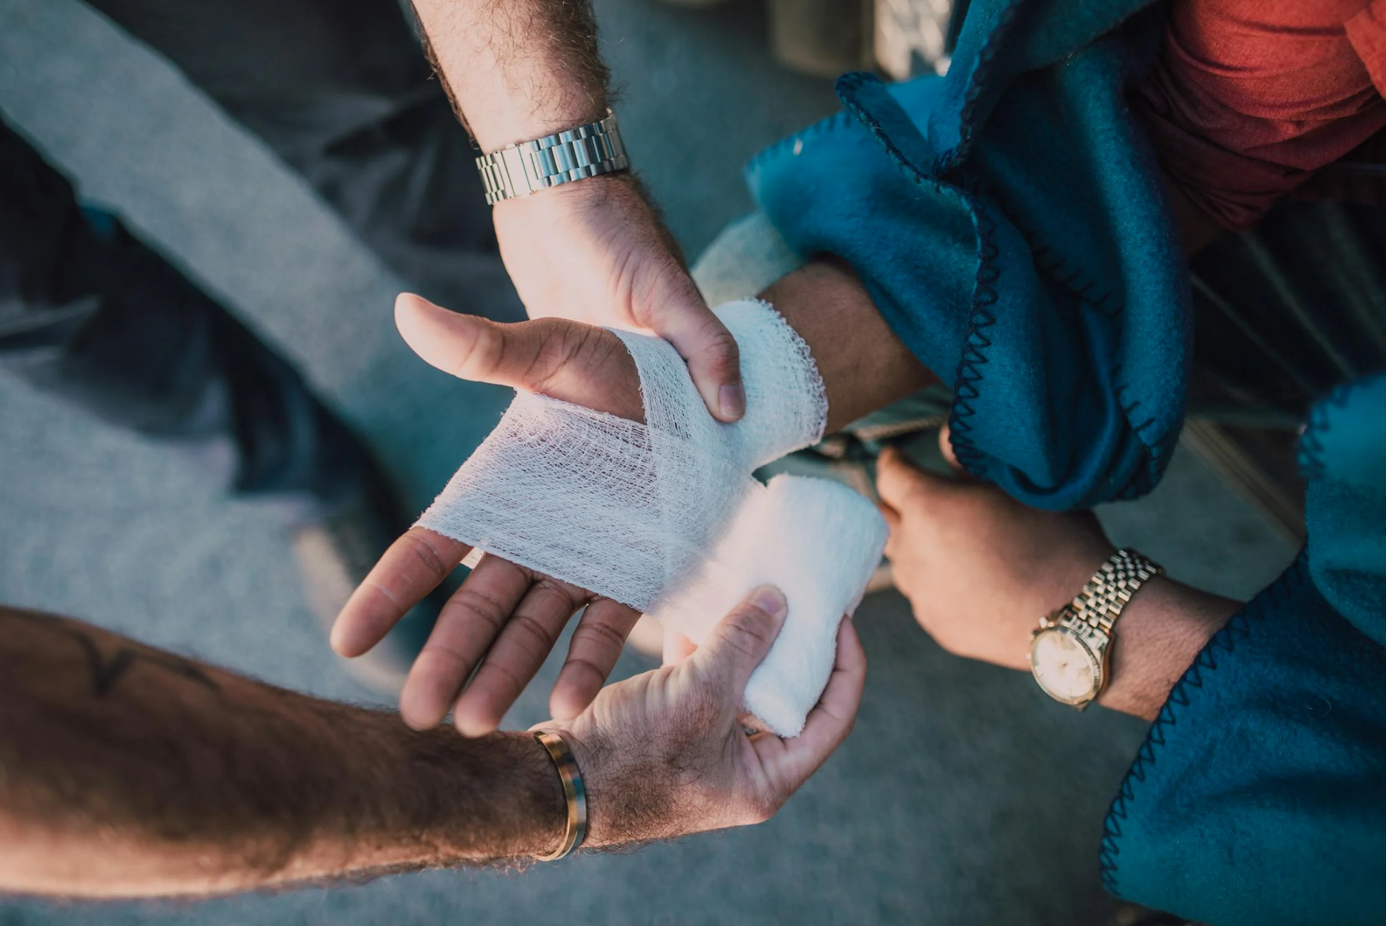 Man applying bandage to someone's hand; image by RDNE Stock project, via Pexels.com.